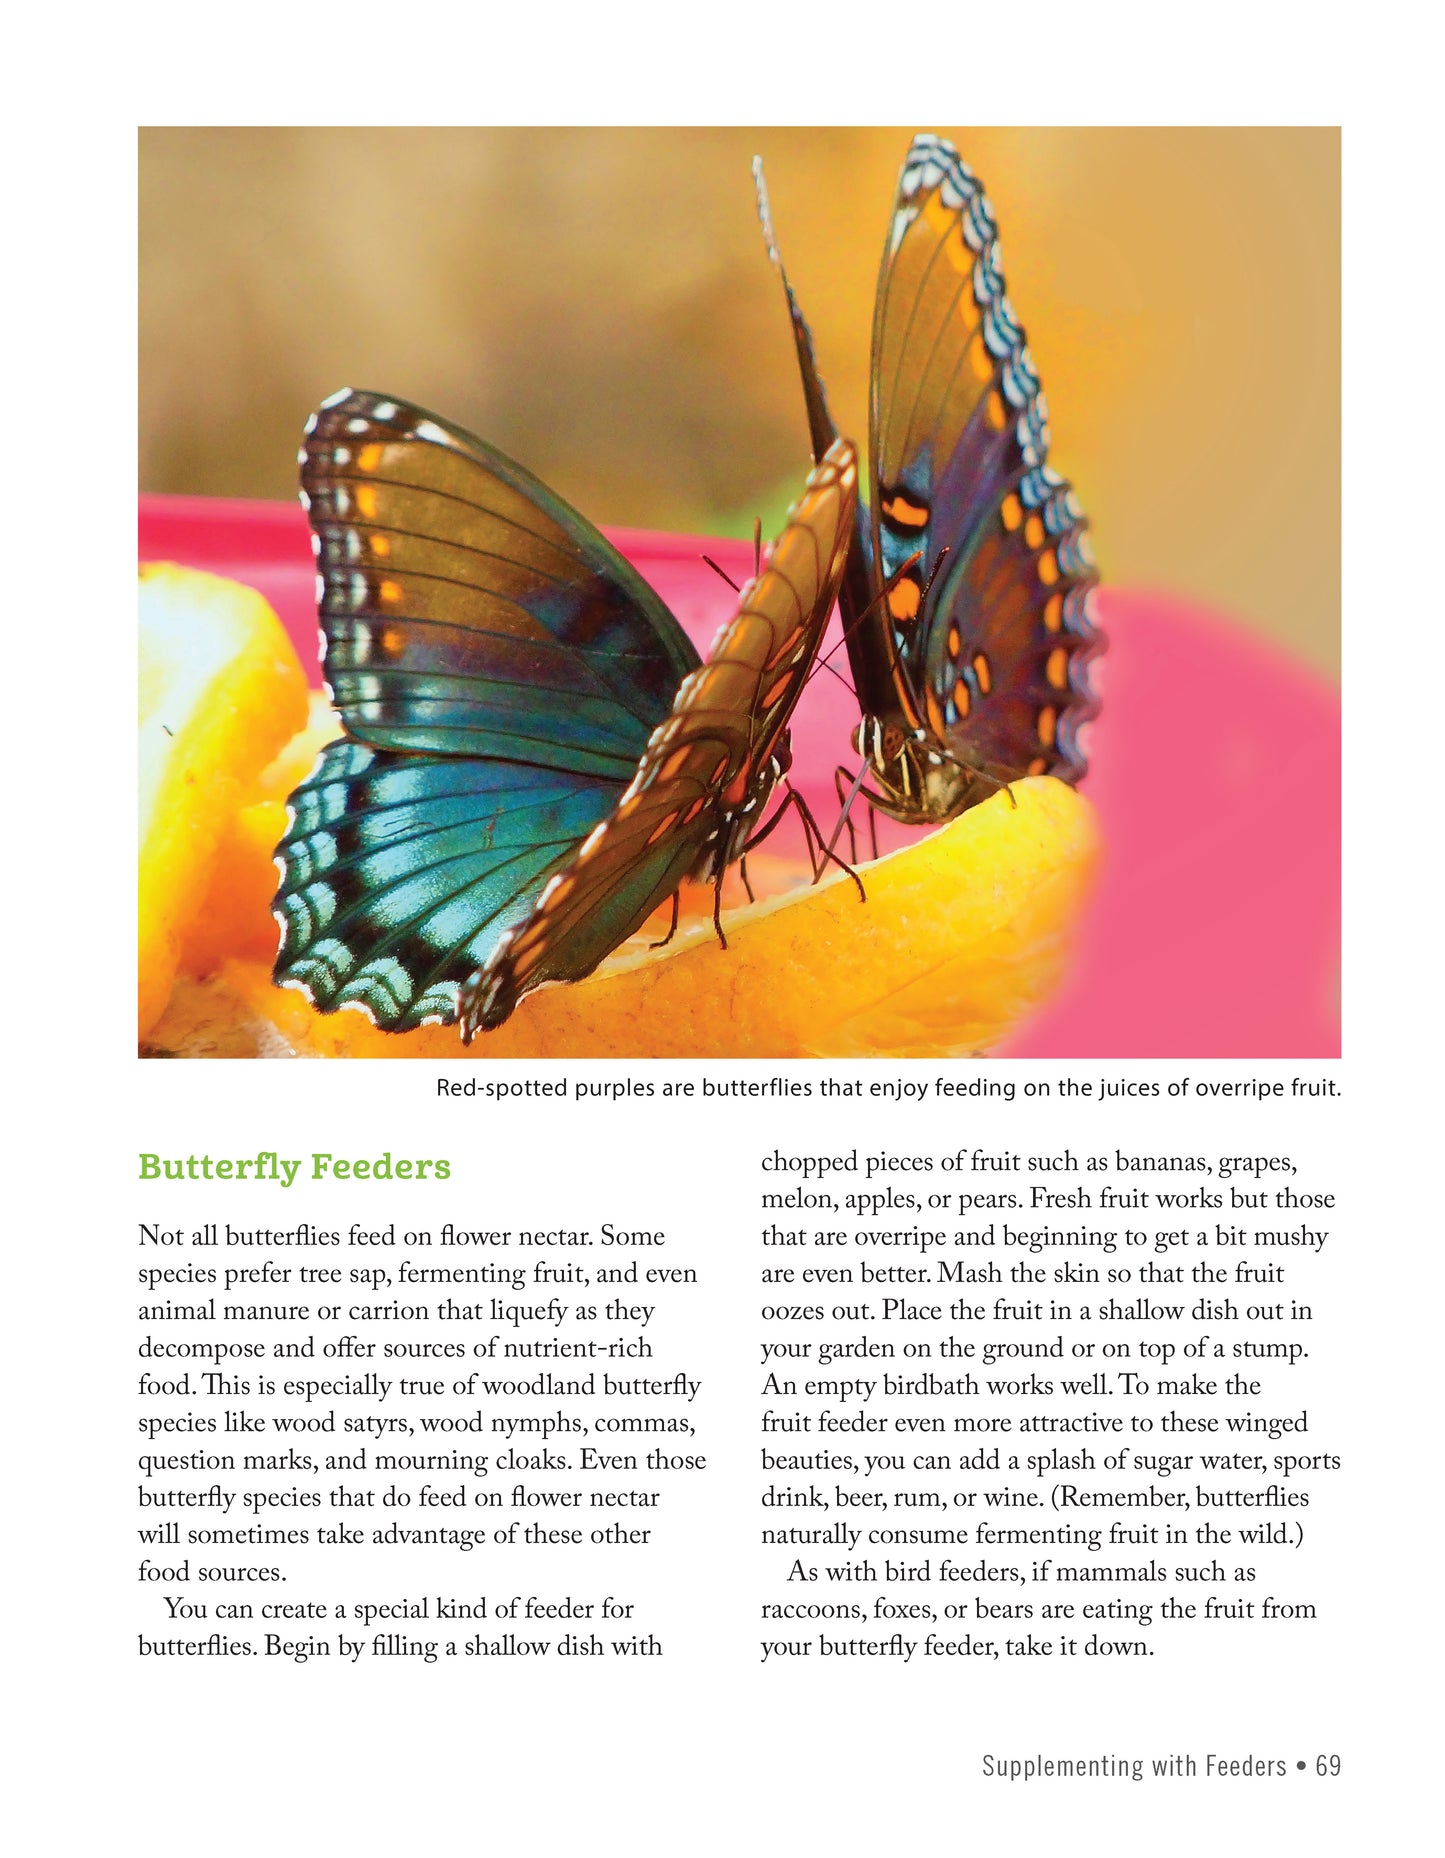 National Wildlife Federation®: Attracting Birds, Butterflies, and Other Backyard Wildlife, Expanded Second Edition